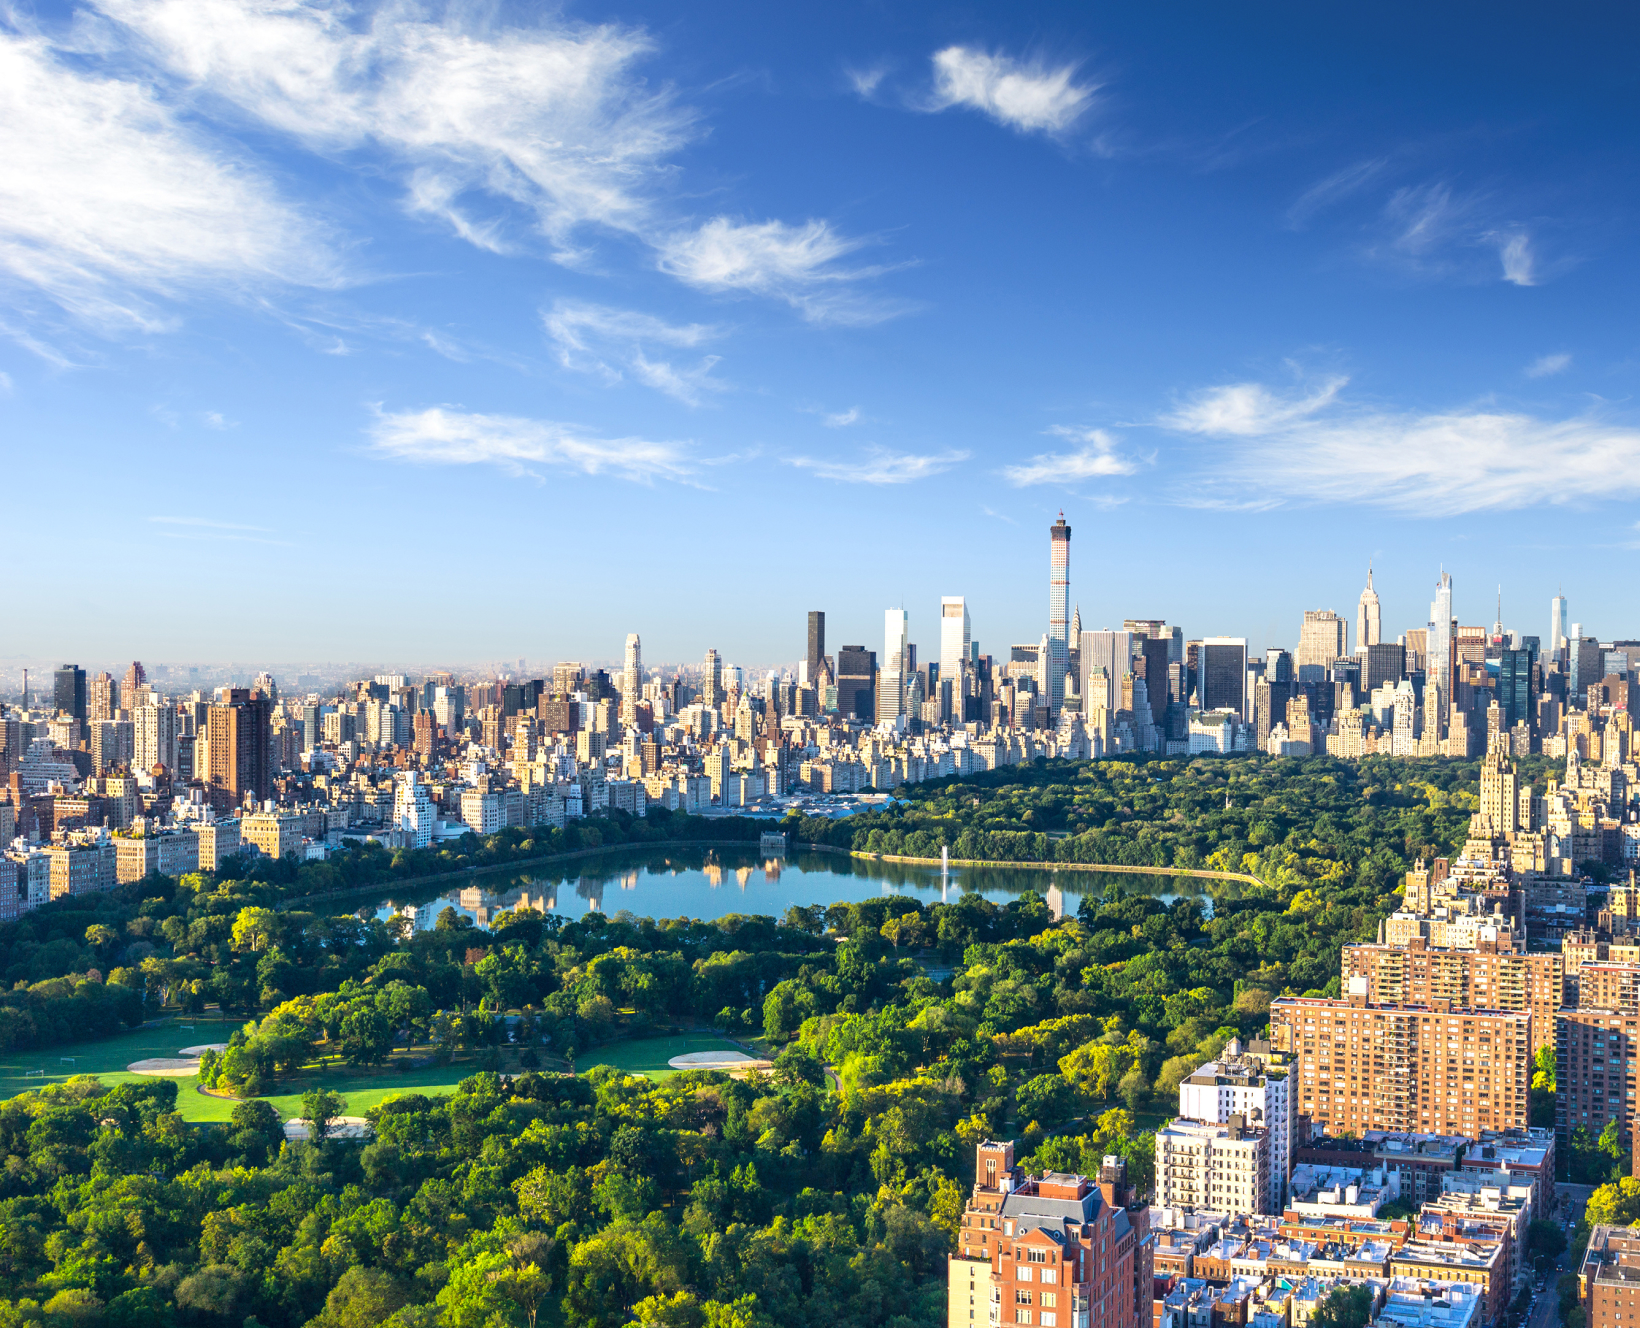 A picture of Central Park and the New York City skyline showing buildings, green trees, and a blue sky